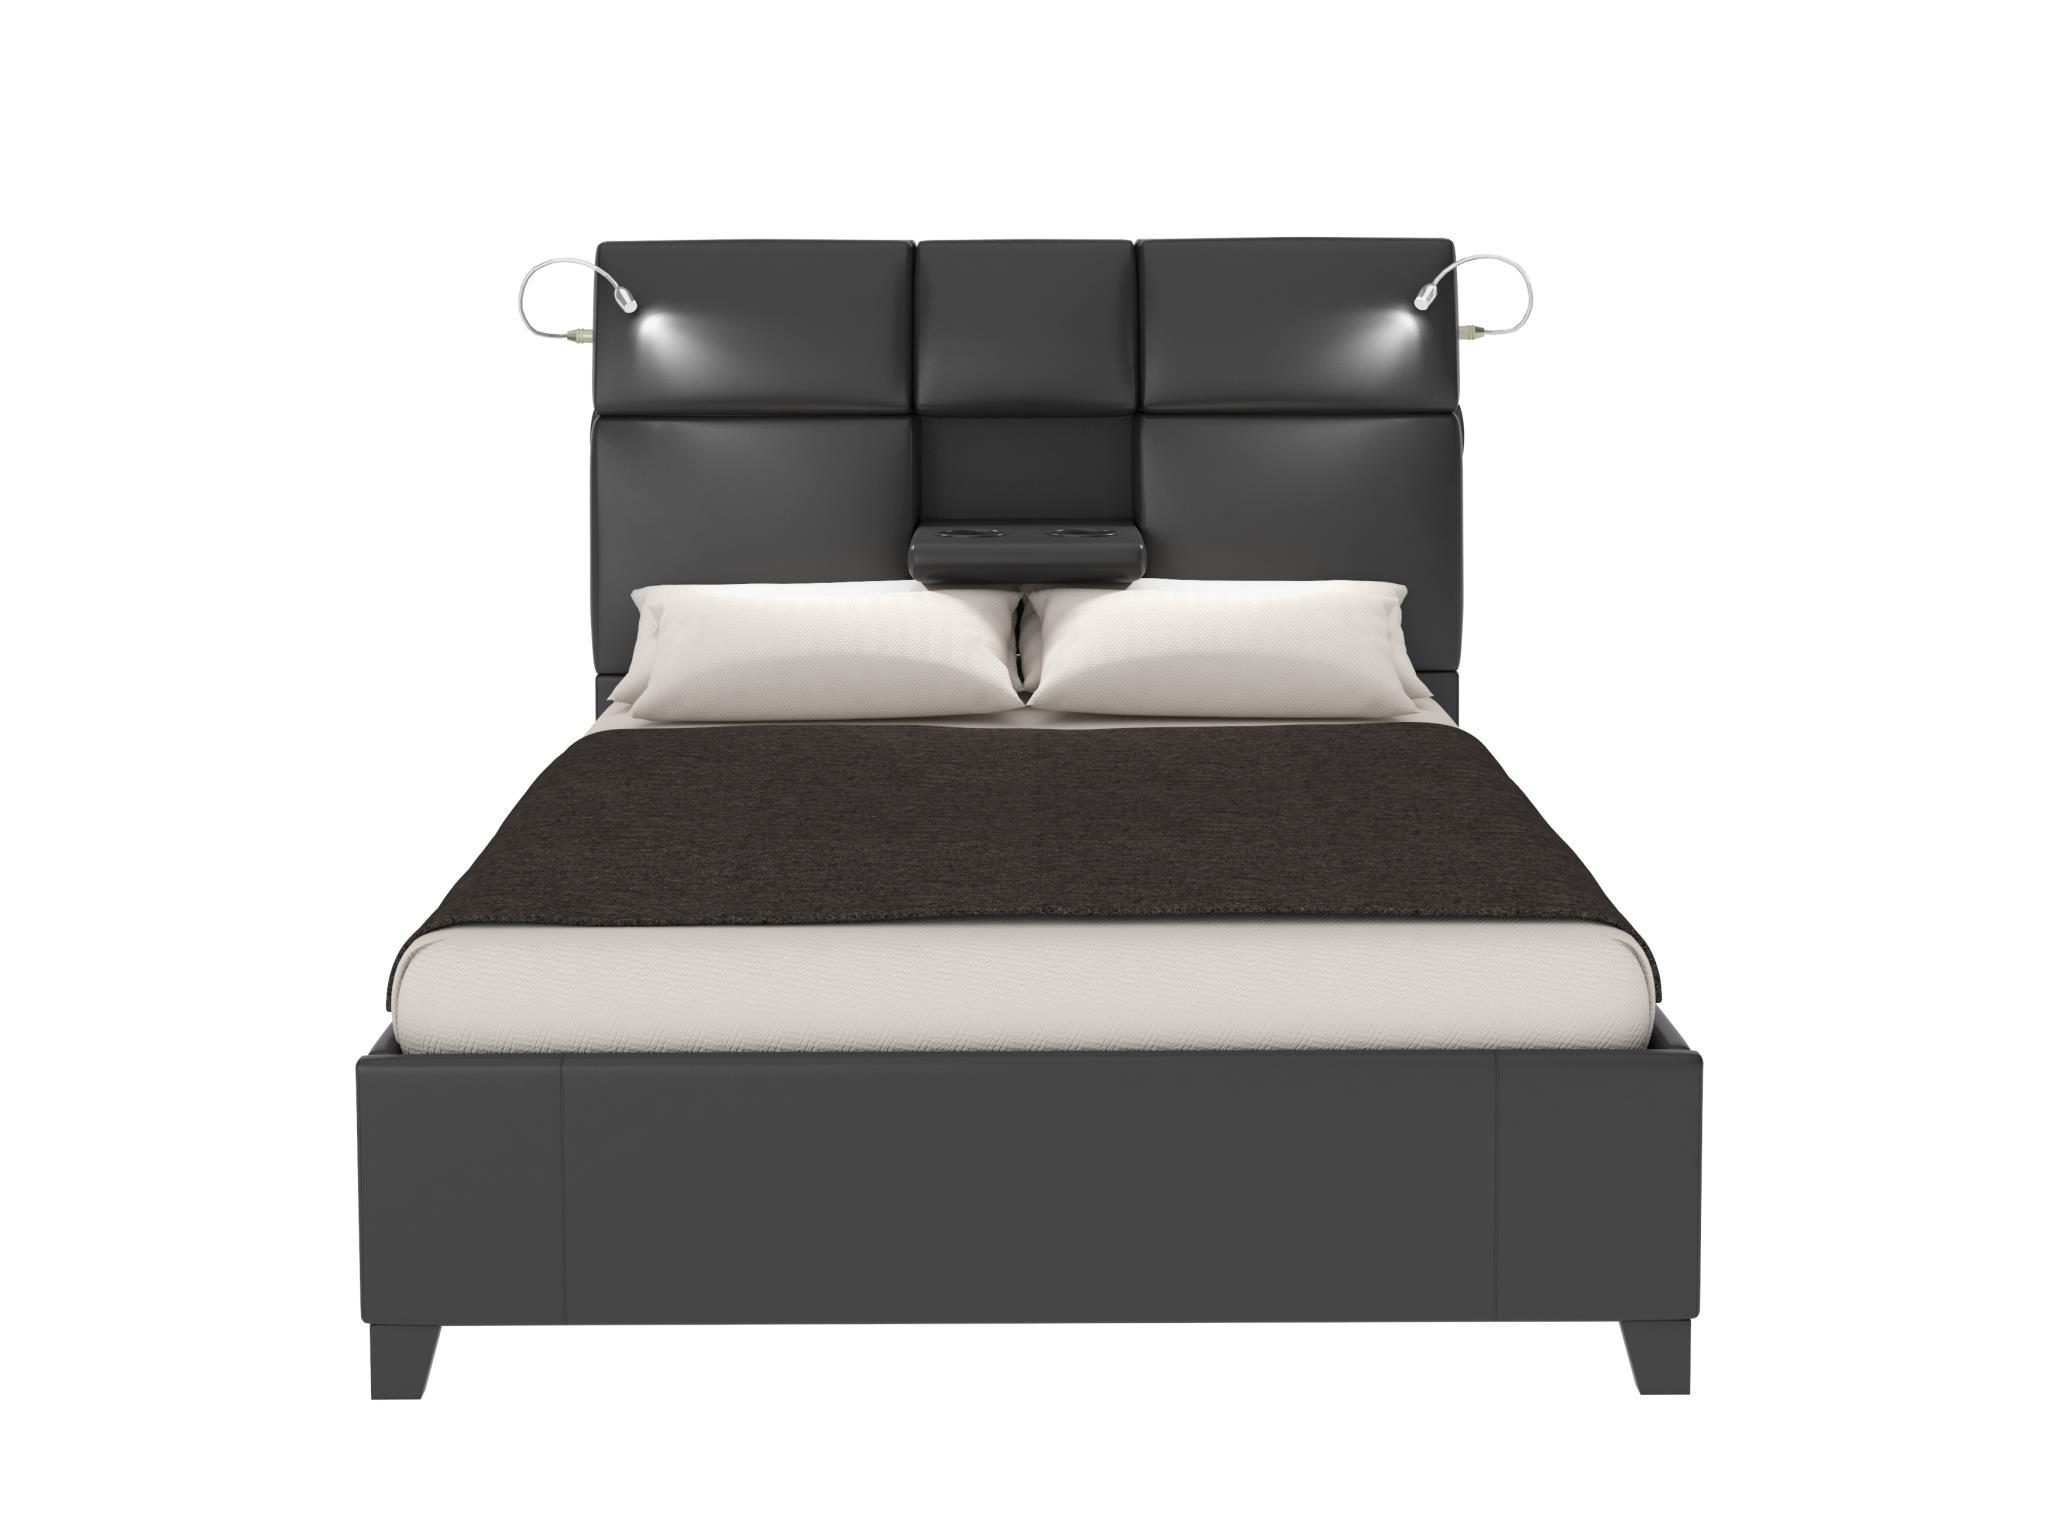 Modern, Transitional Bed Calypso 1959-110 in Black Leather